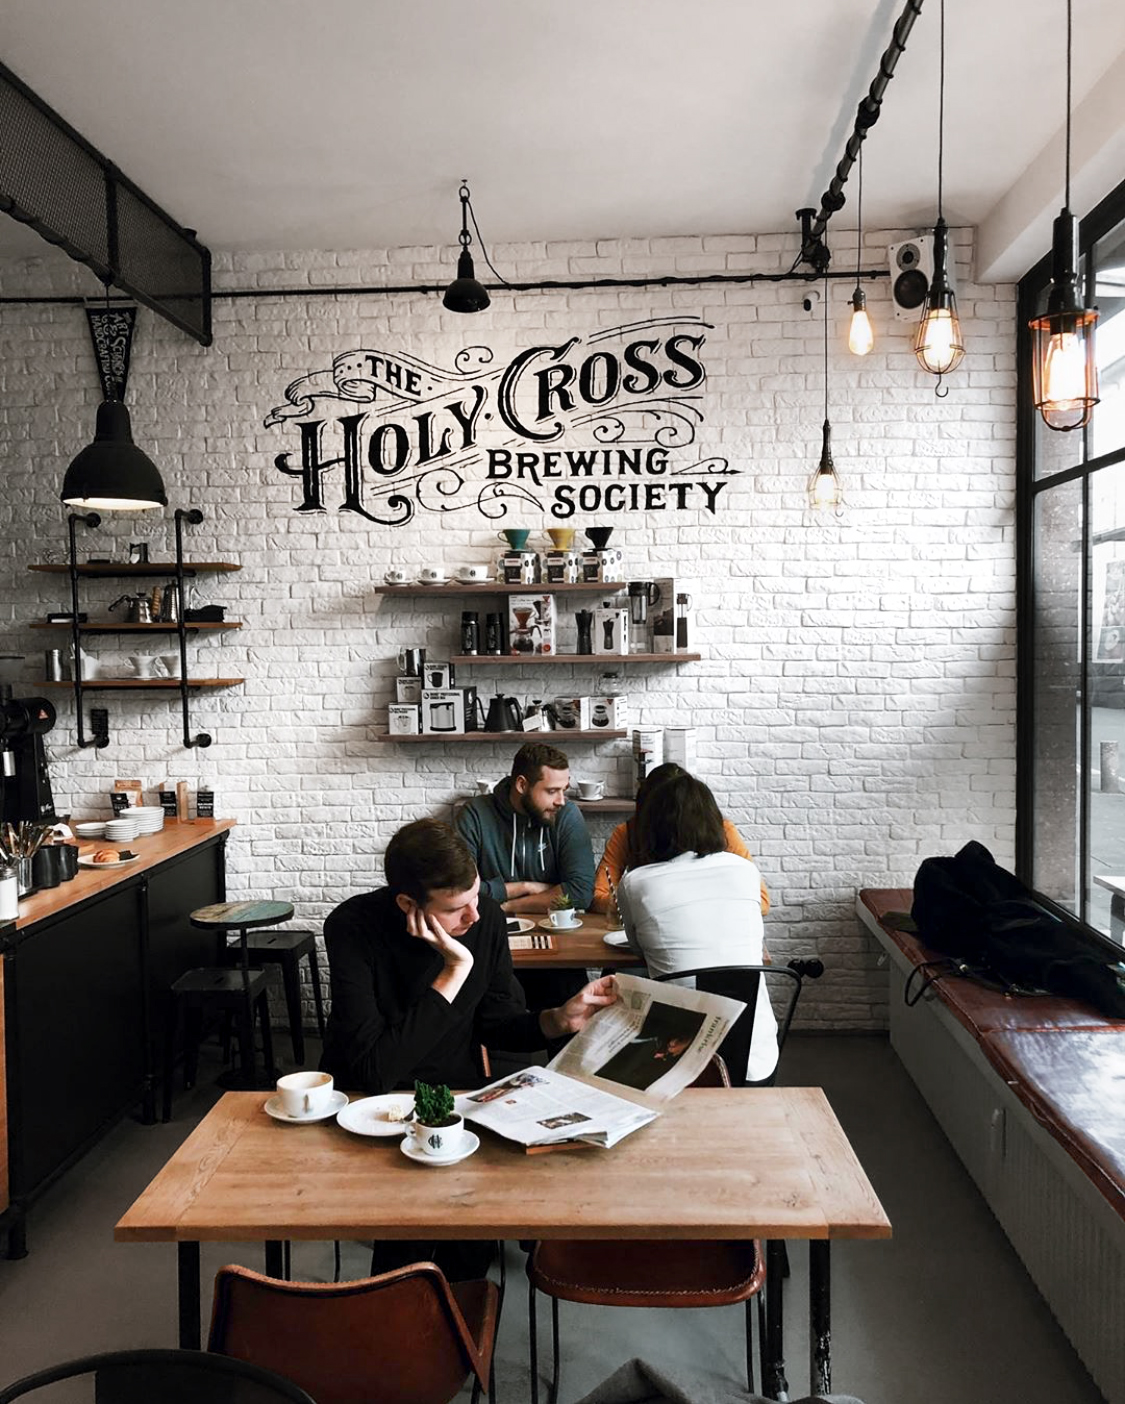 The Holy Cross Brewing Society